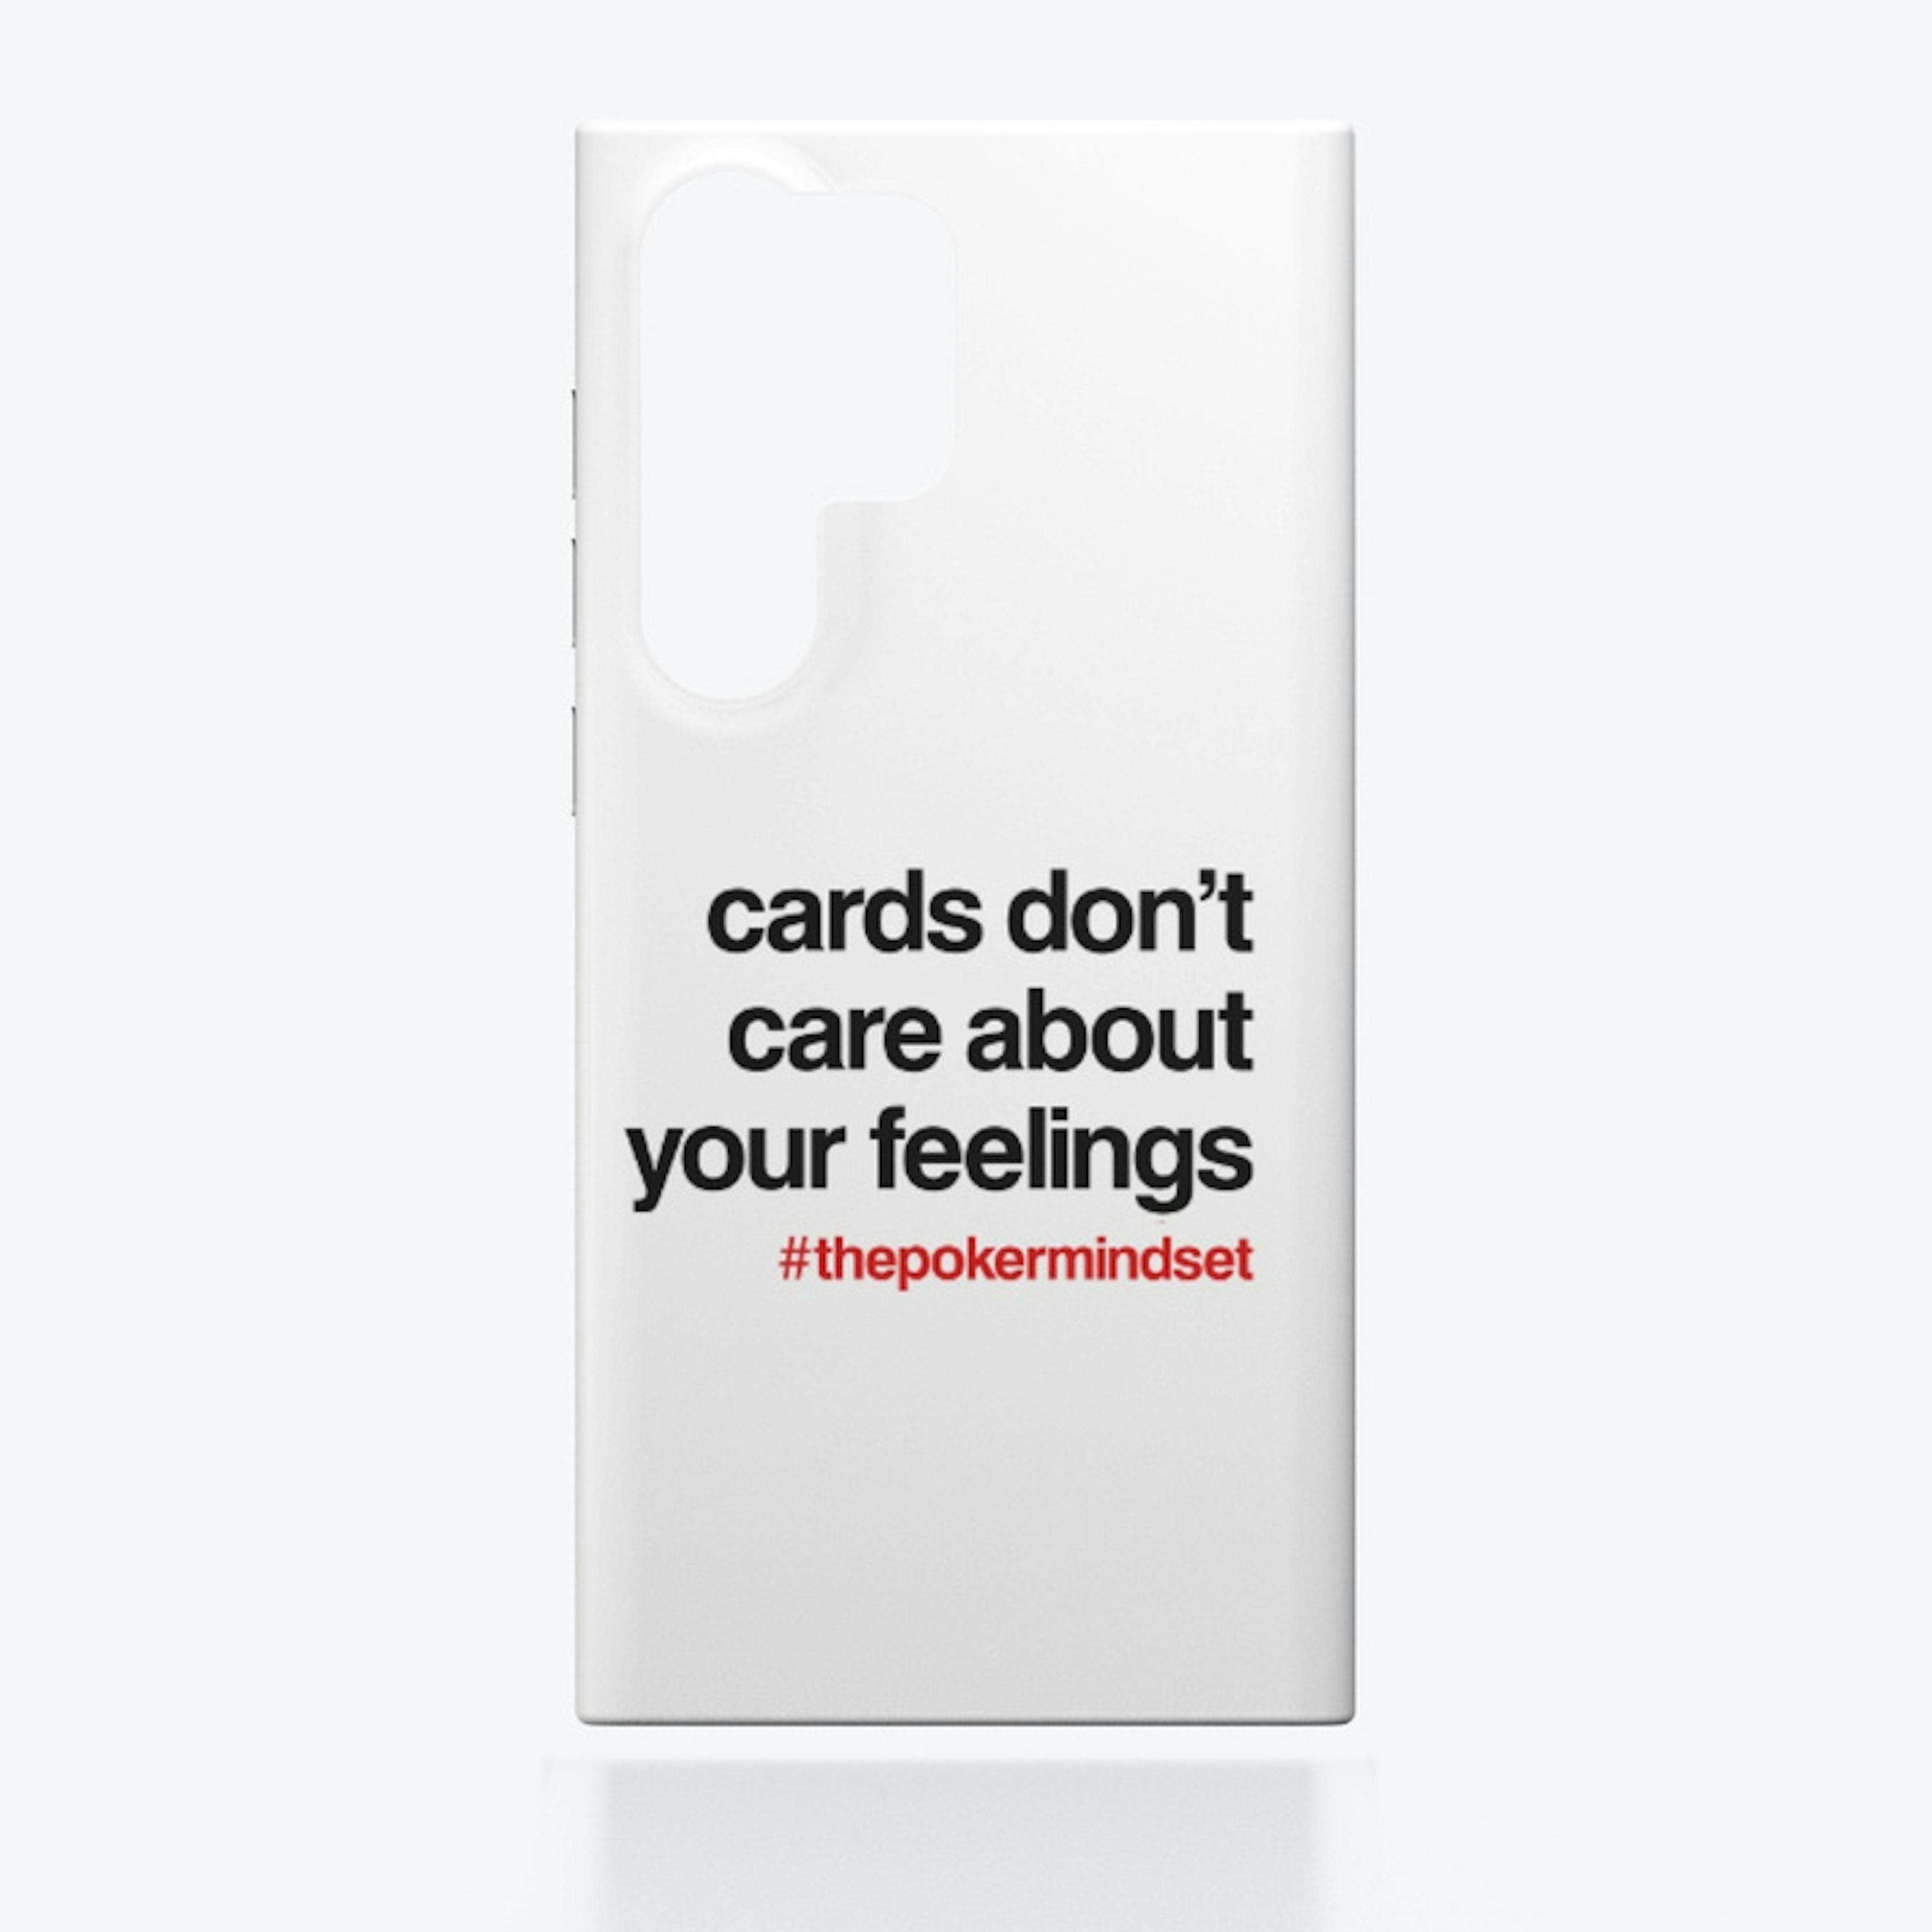 Cards don't care